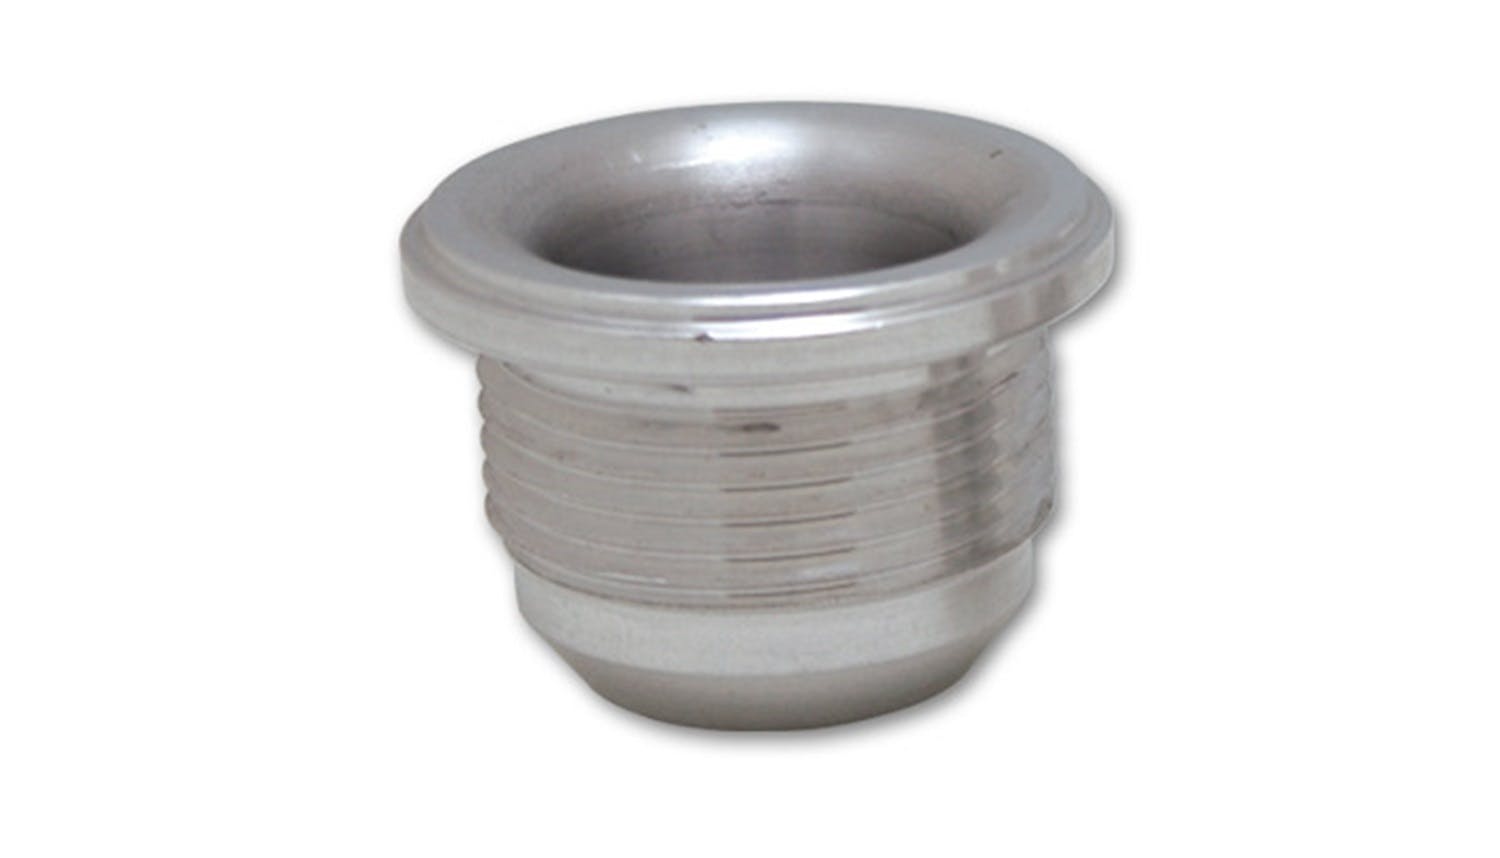 Vibrant Performance 11153 Male -10AN Aluminum Weld Bung (7/8-14 SAE Thread; 1-1/8 inch Flange OD)